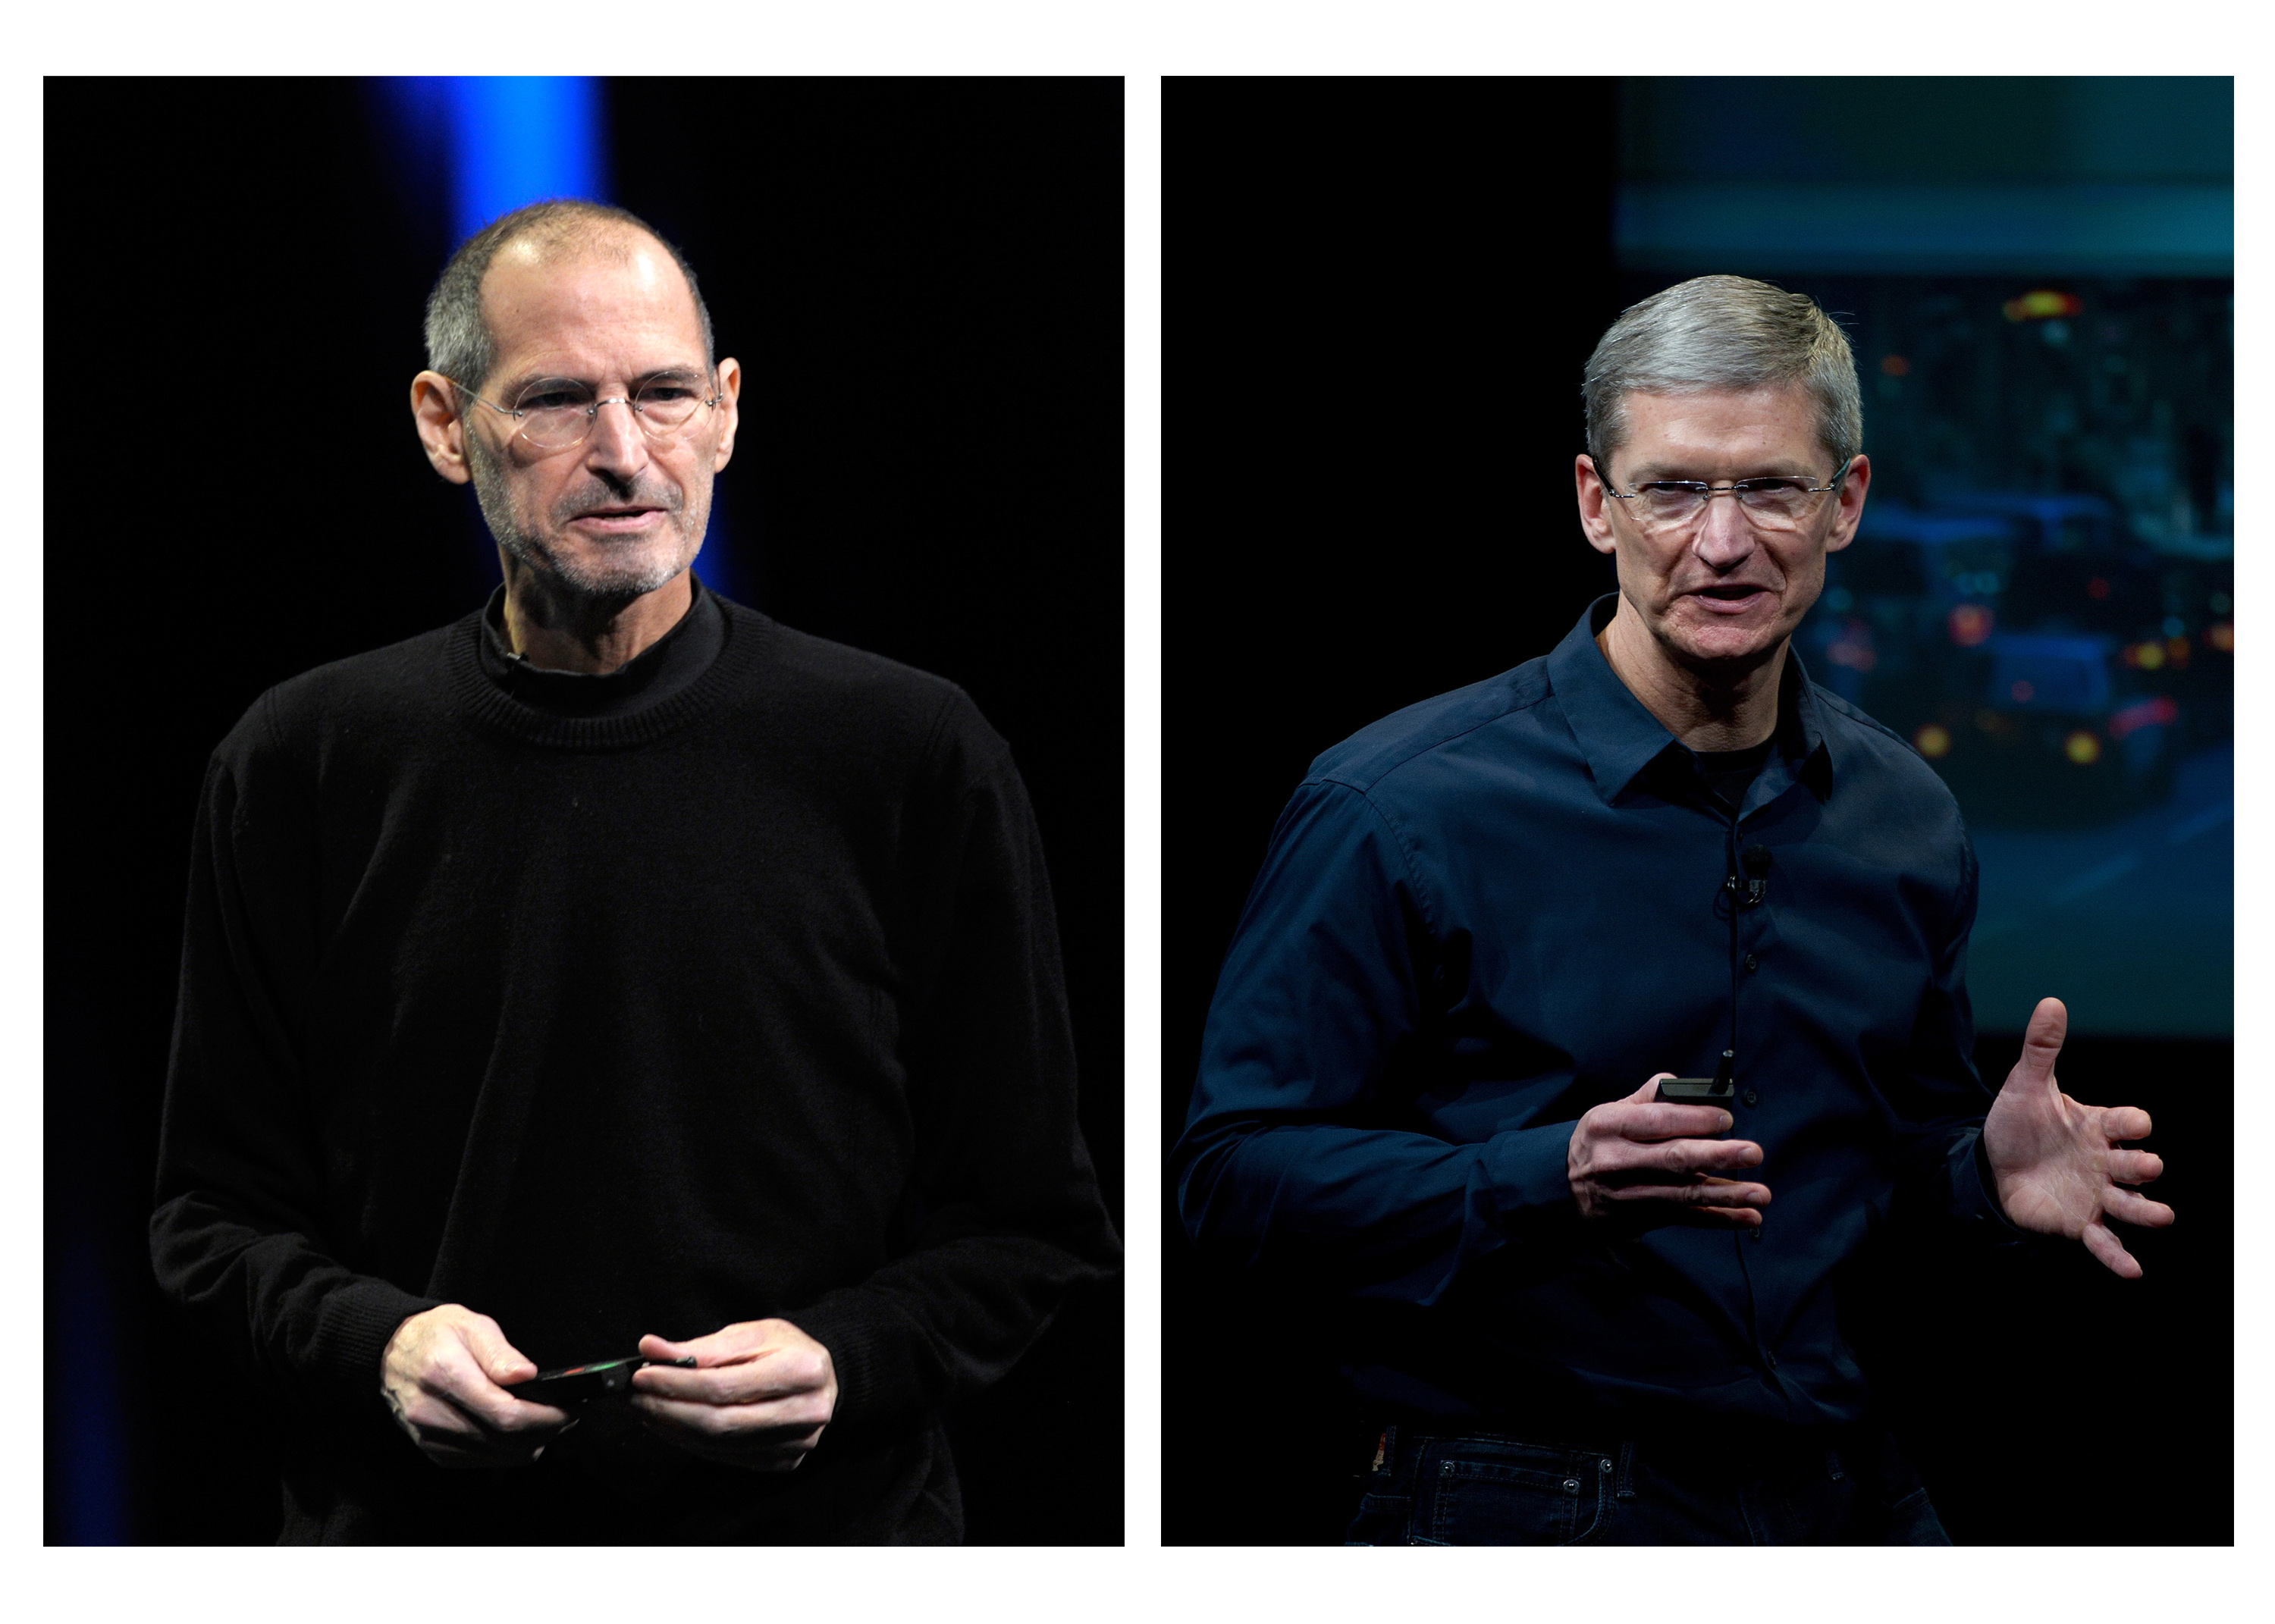 In this combination photo, Steve Jobs, former chief executive officer of Apple Inc., left, unveils the iCloud storage system at the Apple Worldwide Developers Conference 2011 in San Francisco, California, U.S., on Monday, June 6, 2011, while Tim Cook, chief executive officer of Apple Inc., right, speaks during an event at the company's headquarters in Cupertino, California, U.S., on Tuesday, Oct. 4, 2011. (Bloomberg&mdash;Bloomberg via Getty Images)